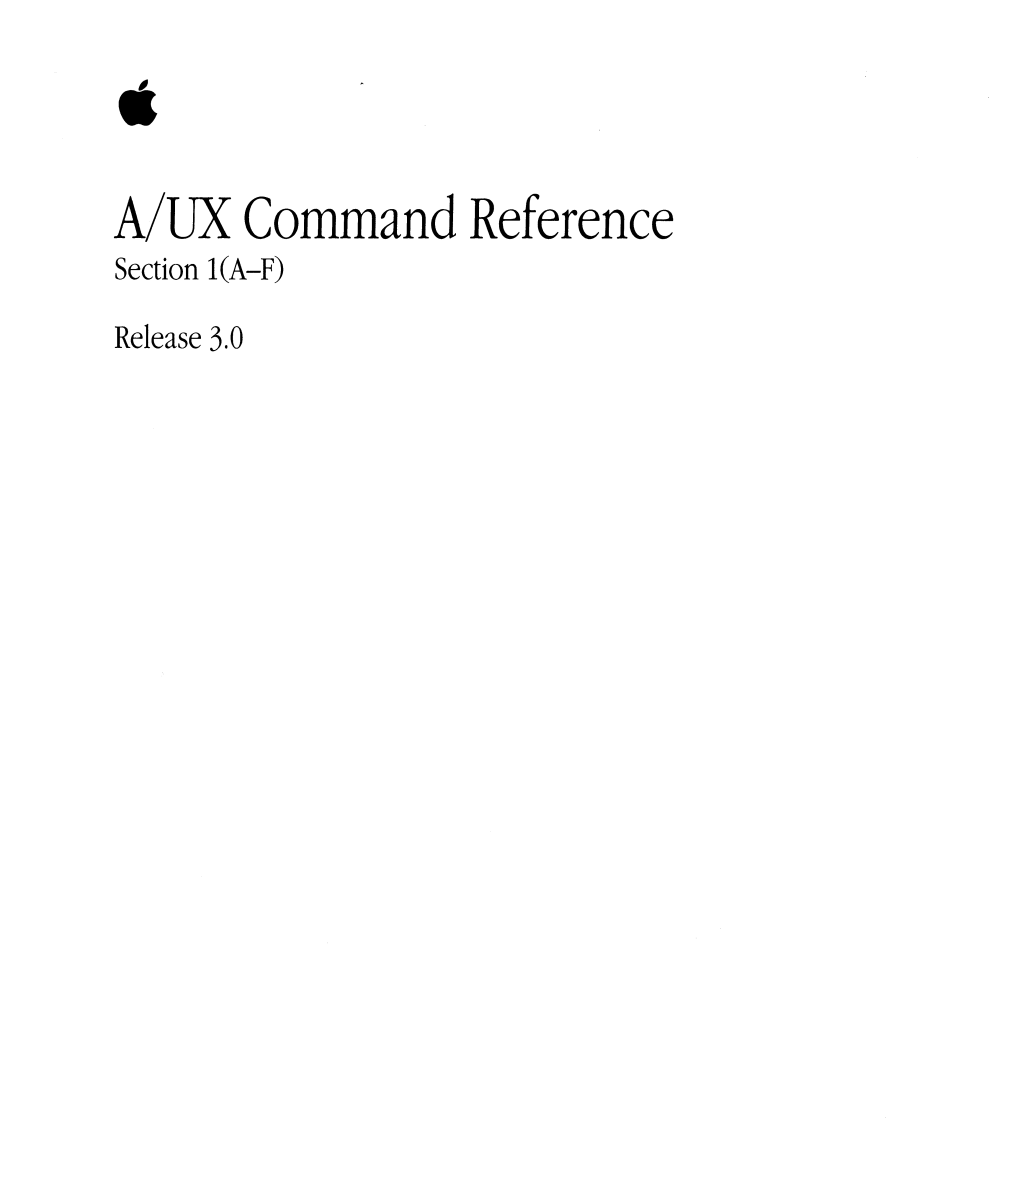 A/UX Command Reference Section 1(A-F)